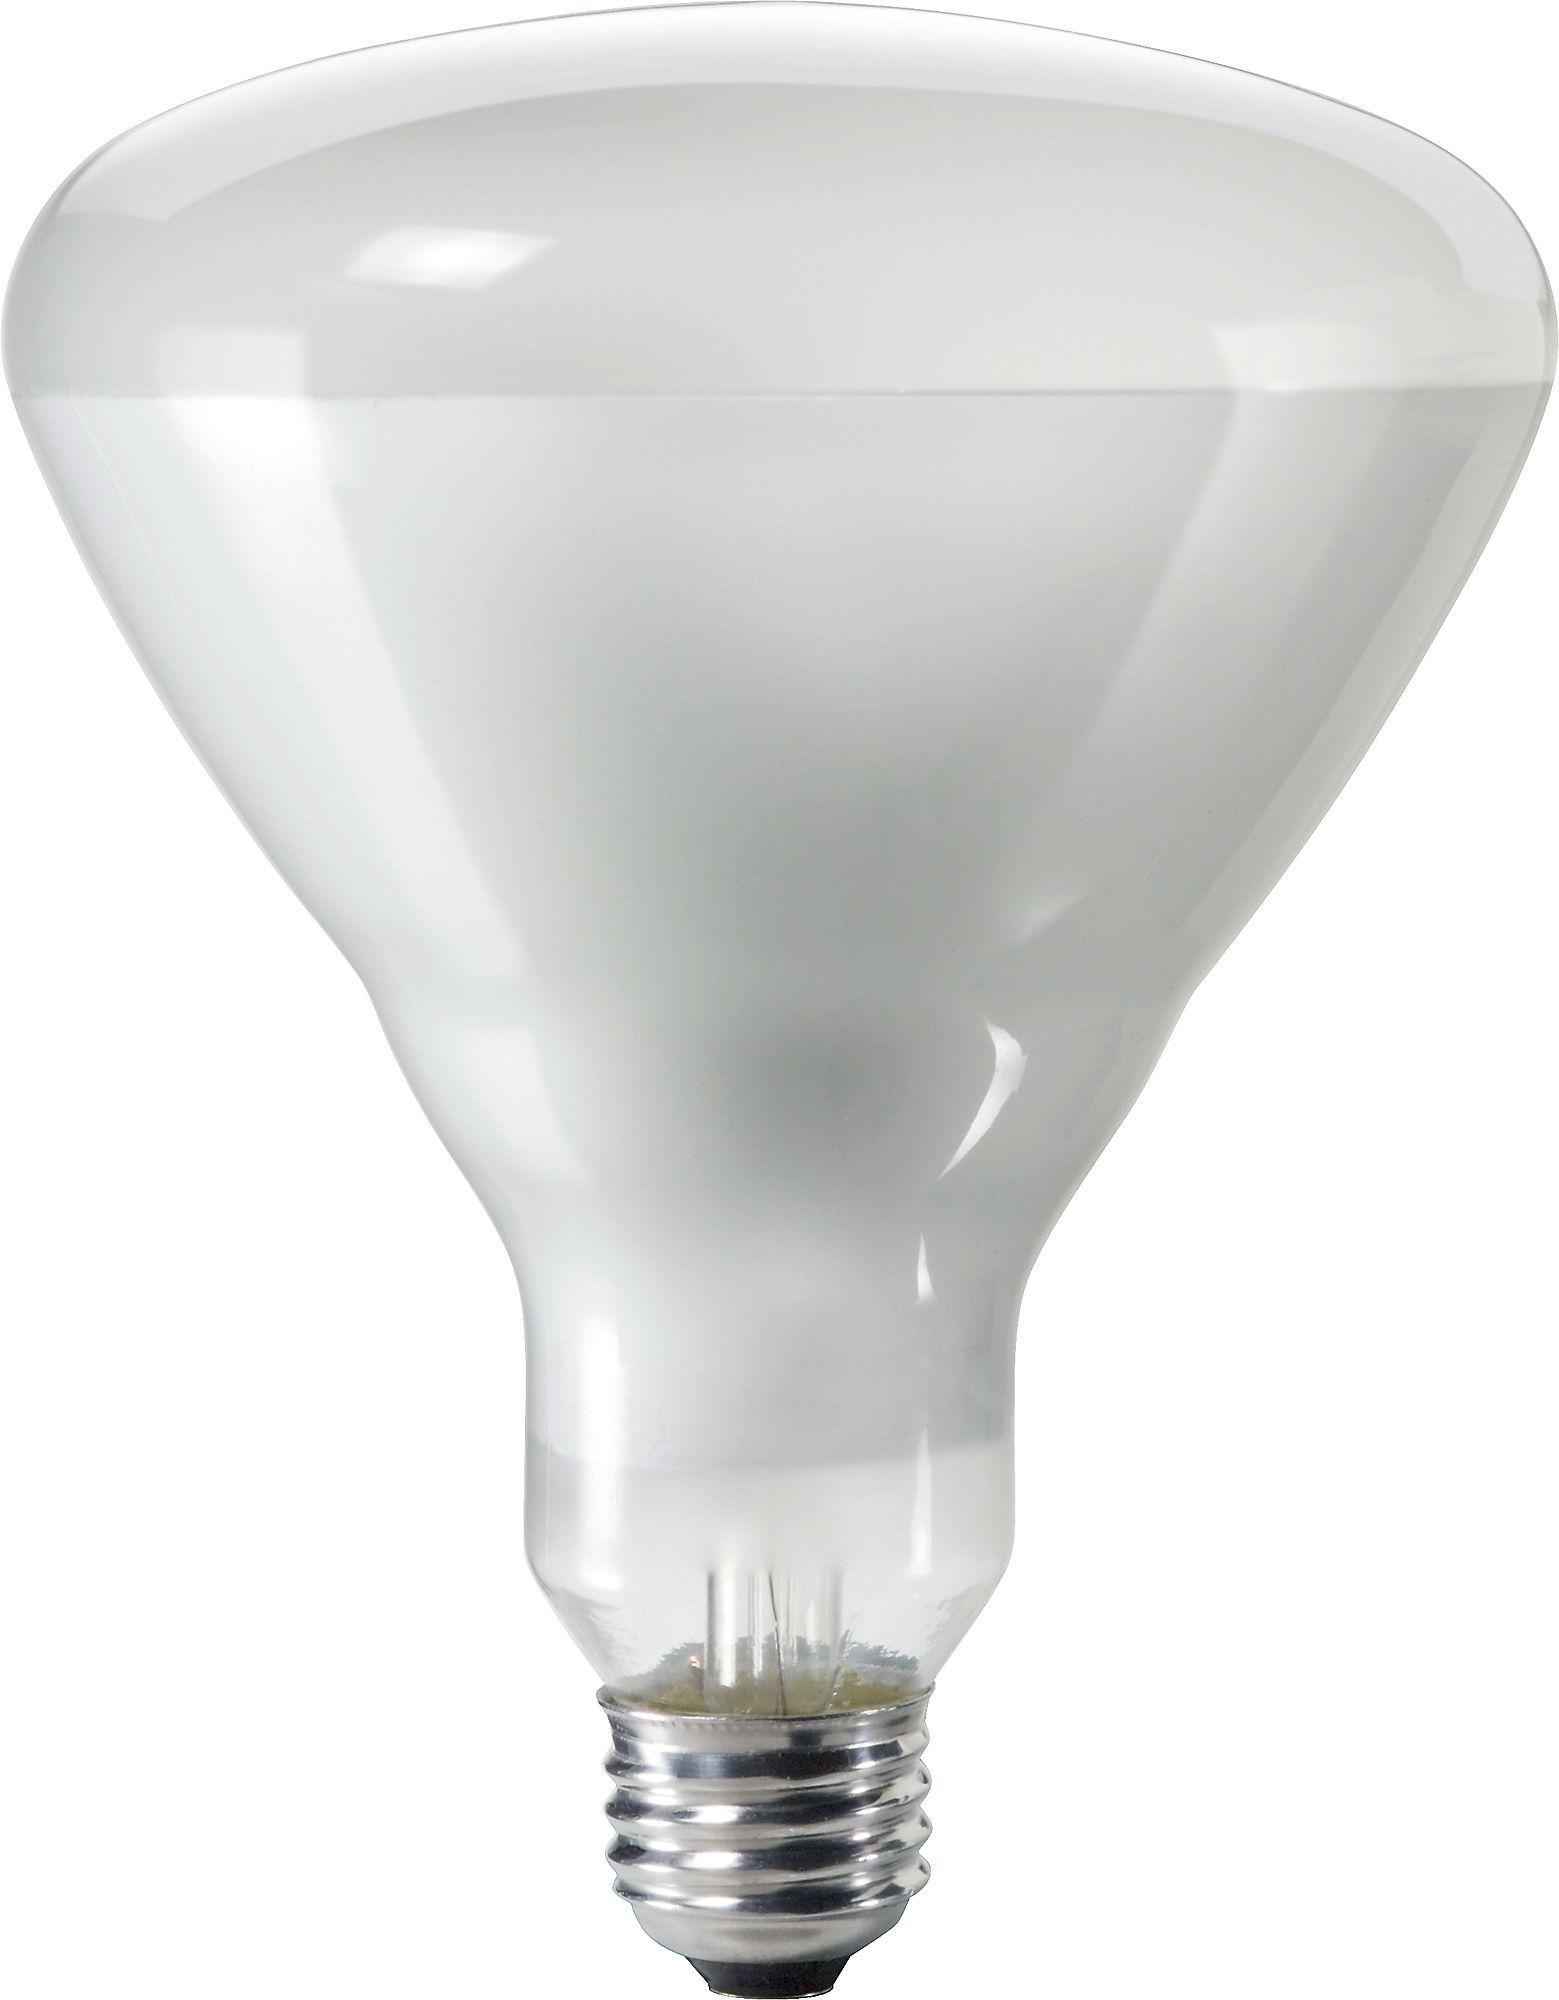 225375 (65BR/FL60) Incandescent Lamp Philips Lighting;Signify Lamps